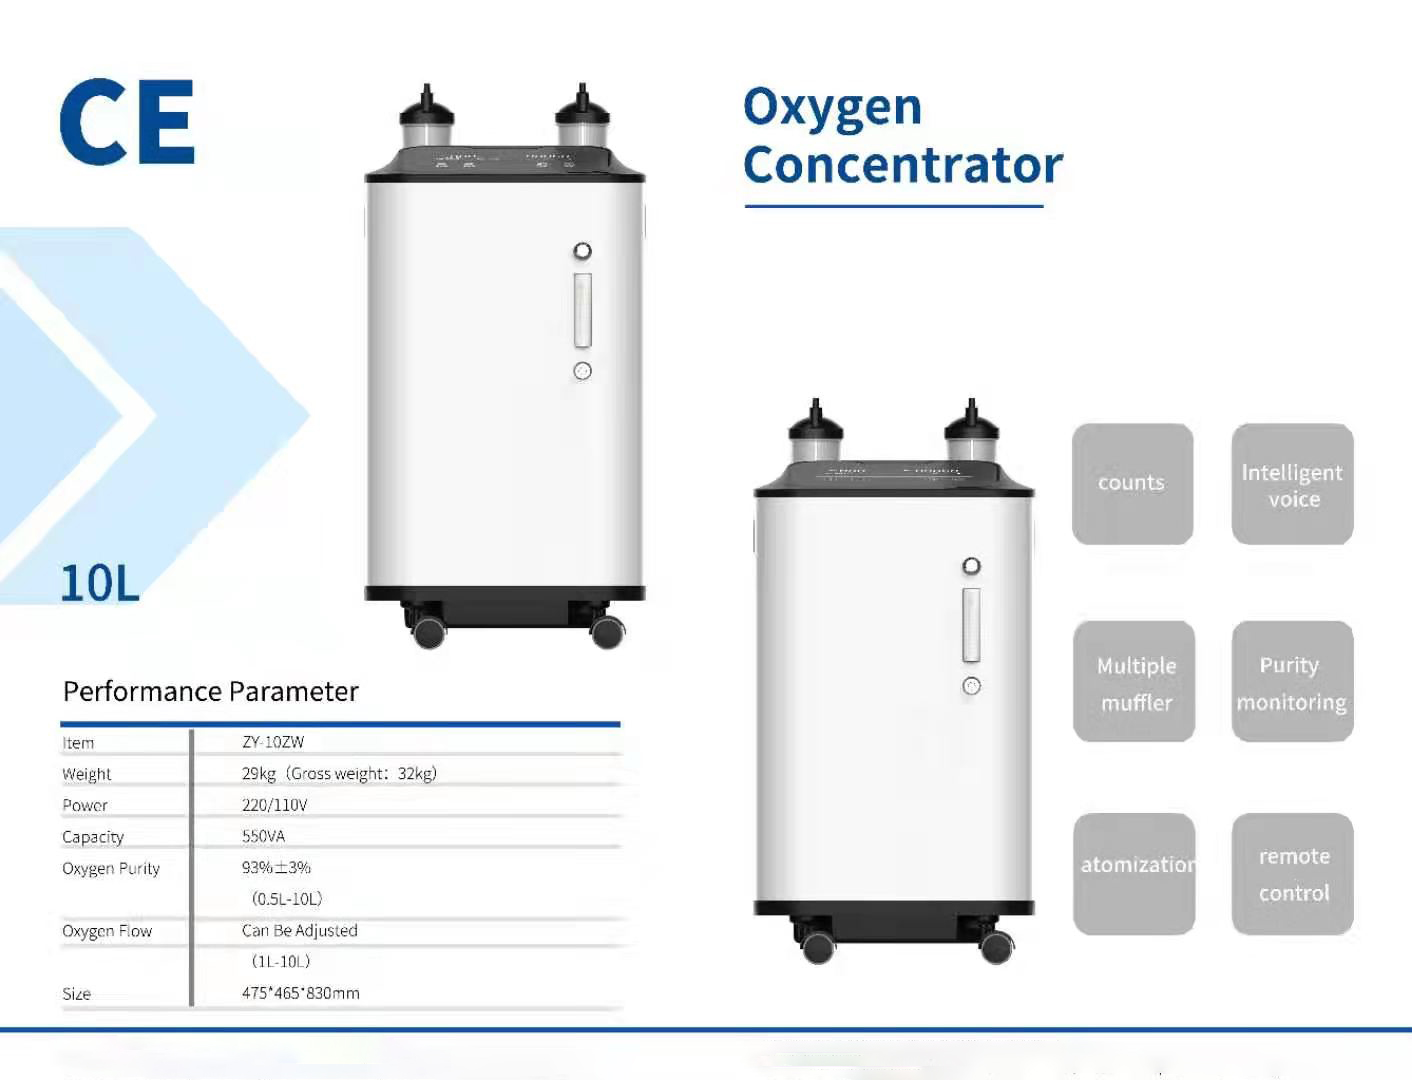 why  customer  choose  HICO  brand    oxygen   concentrator 